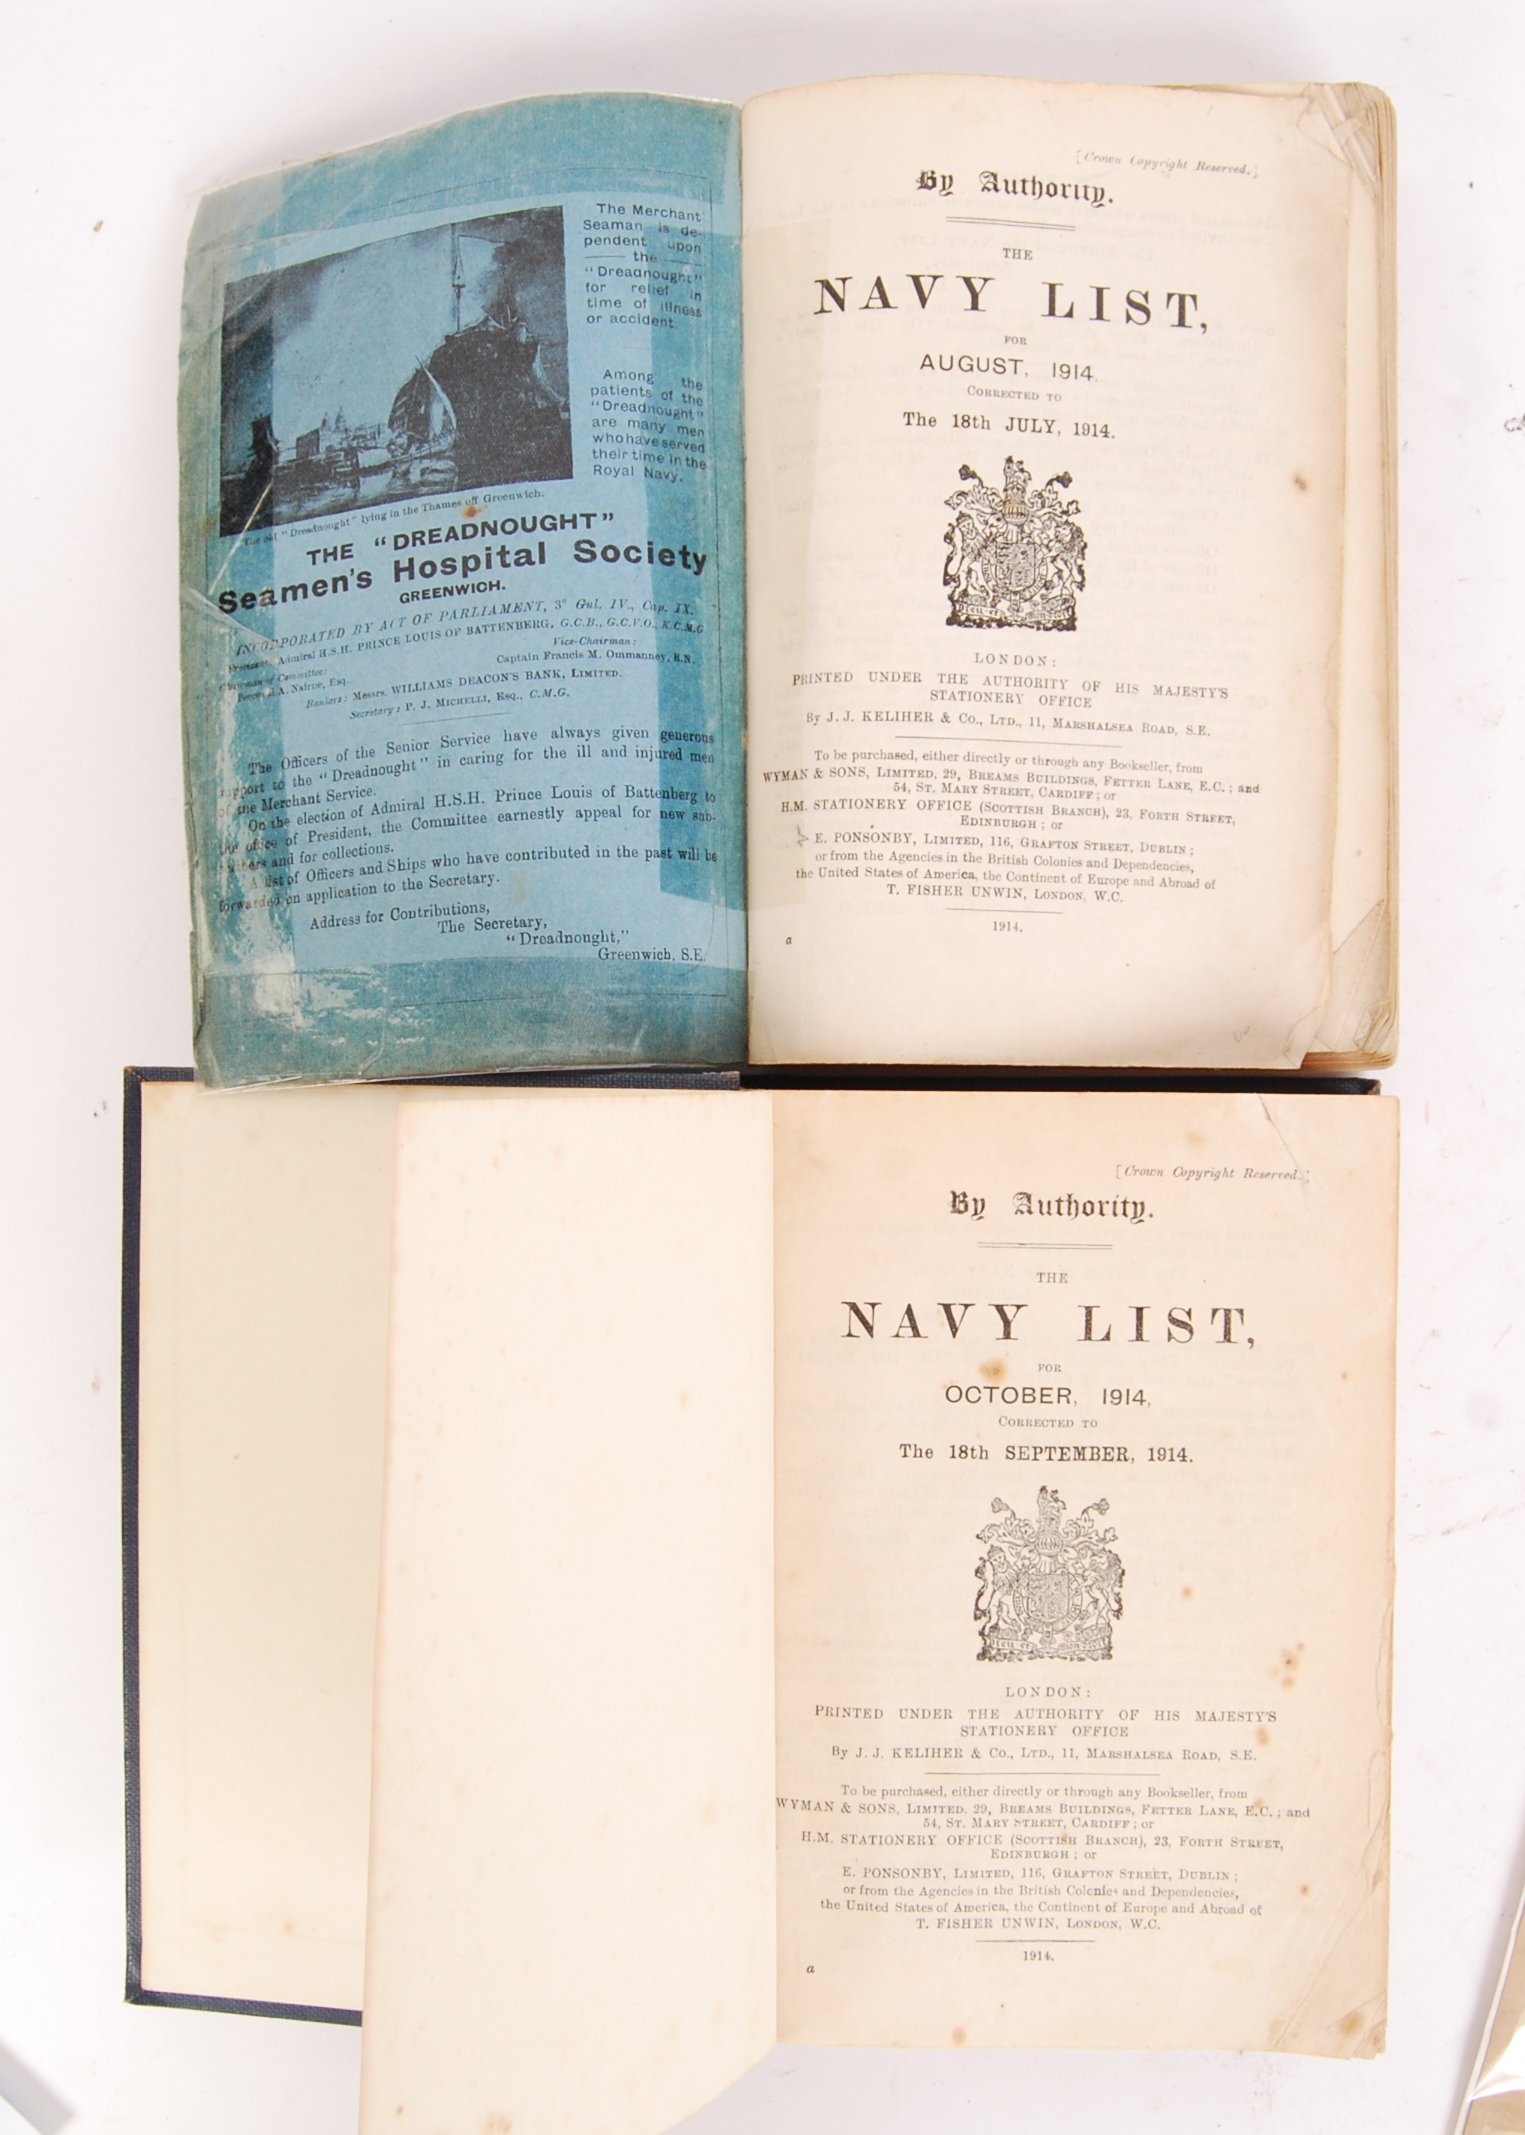 WWI FIRST WORLD WAR RELATED NAVAL & OTHER EPHEMERA - Image 4 of 4